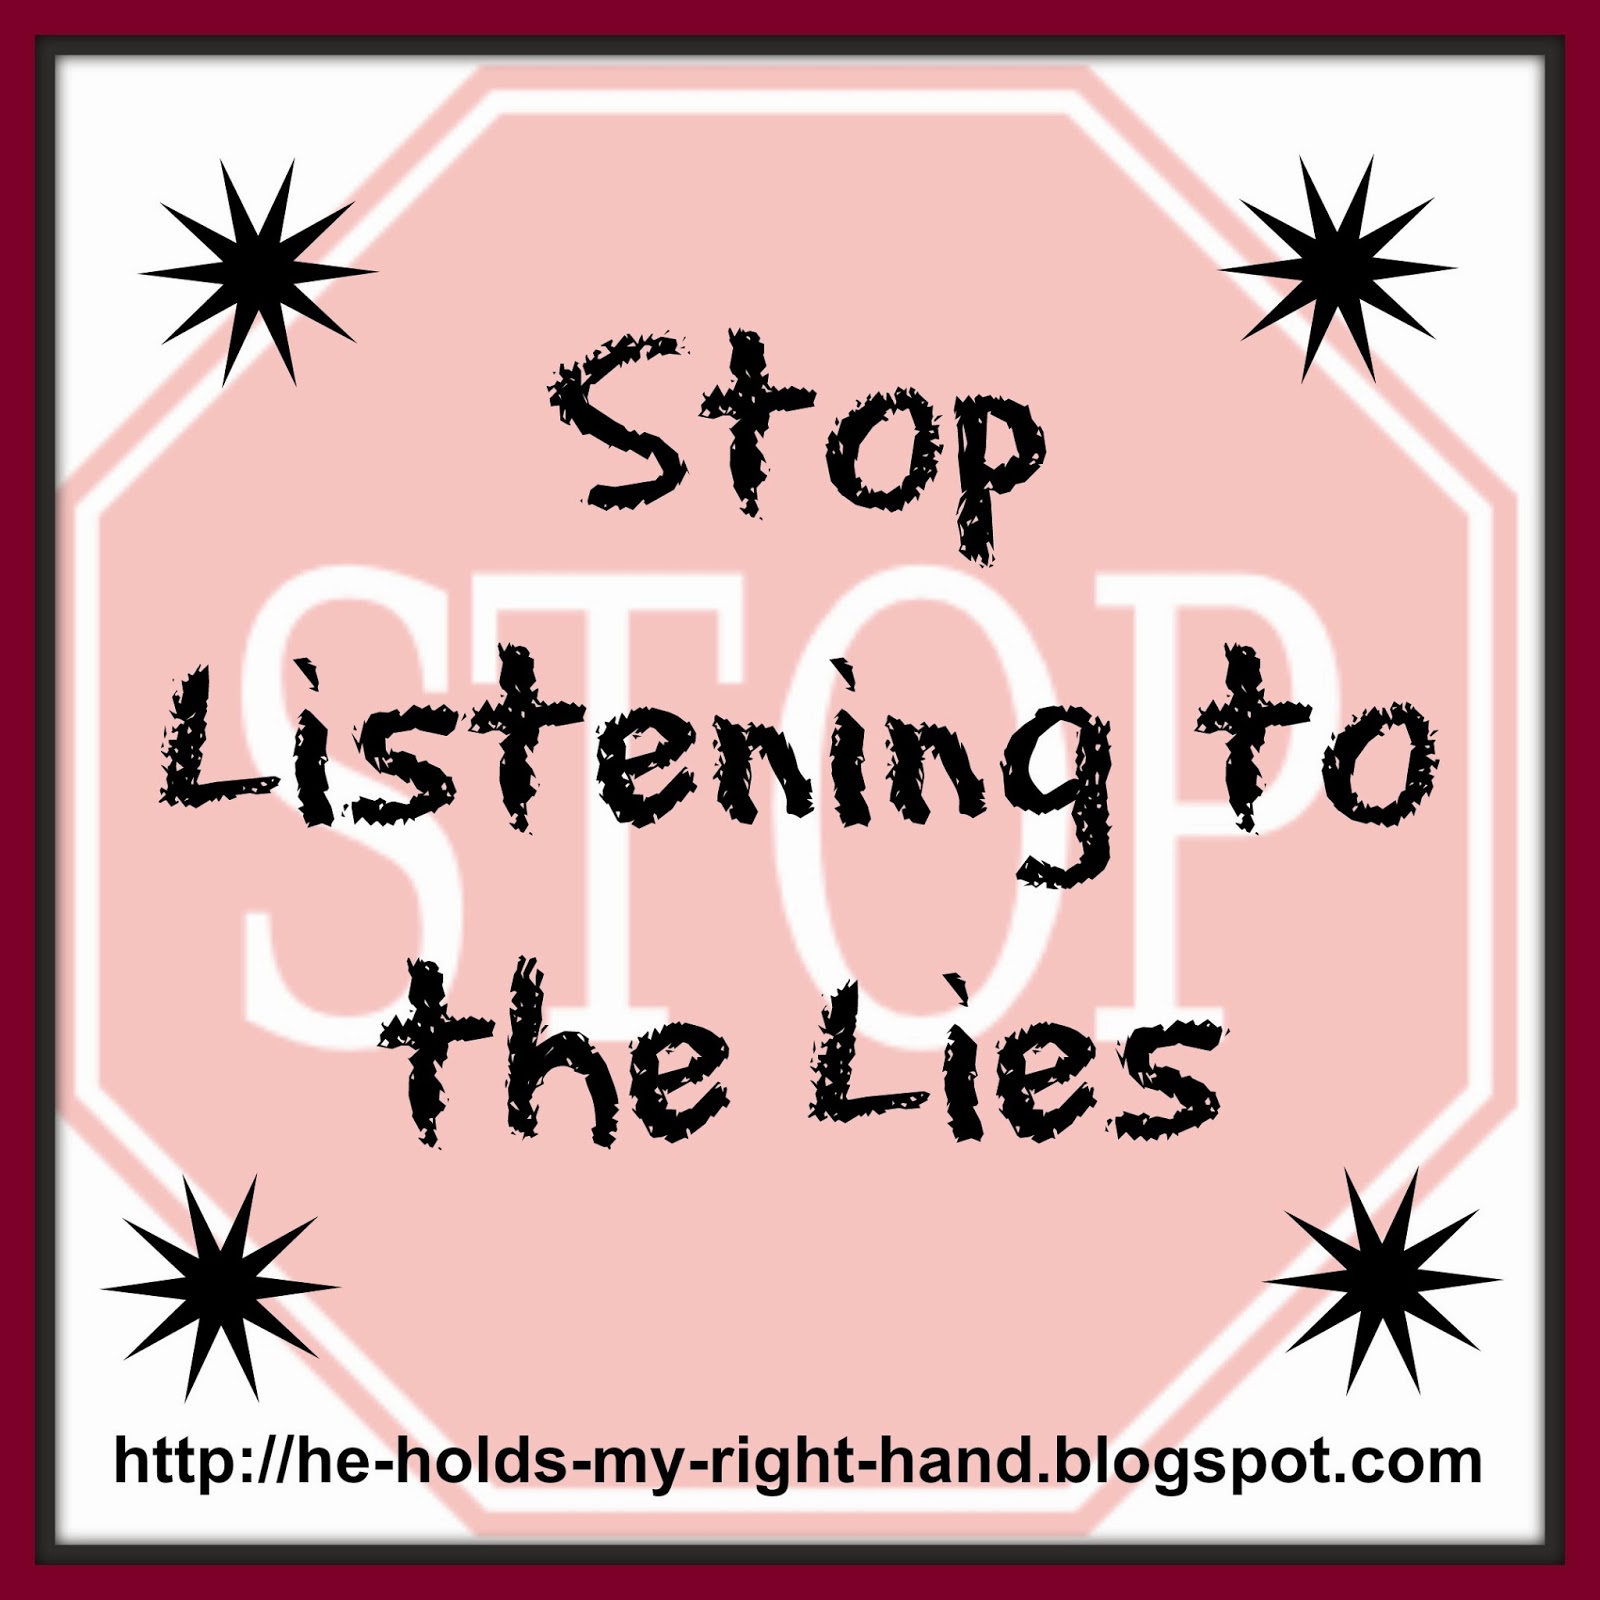 http://www.heholdsmyrighthand.com/2014/09/stop-listening-to-lies.html